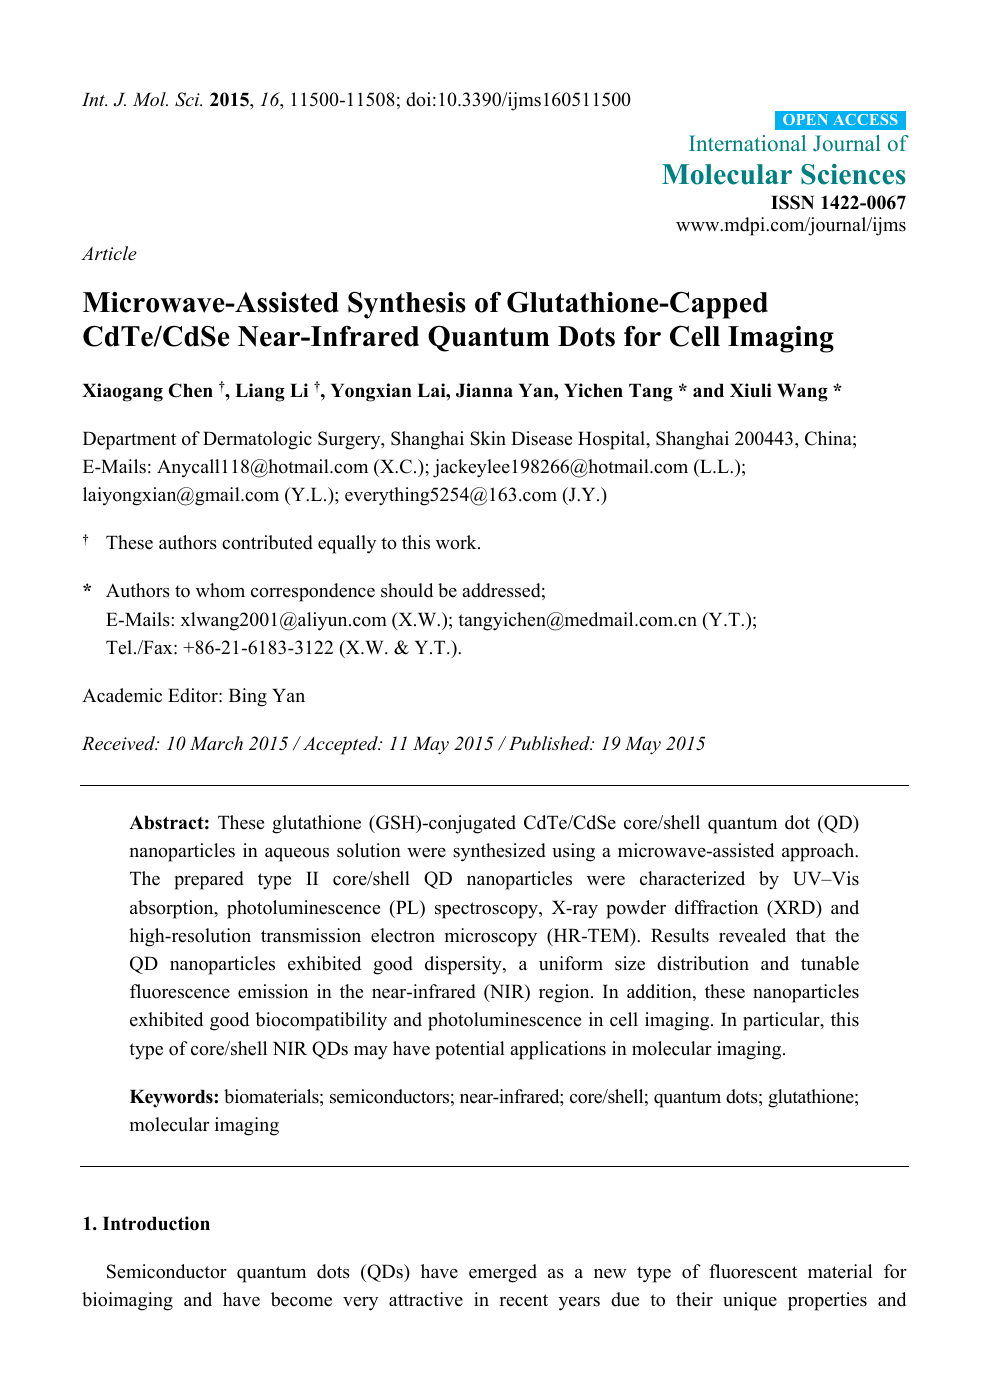 Microwave Assisted Synthesis Of Glutathione Capped Cdte Cdse Near Infrared Quantum Dots For Cell Imaging Topic Of Research Paper In Nano Technology Download Scholarly Article Pdf And Read For Free On Cyberleninka Open Science Hub